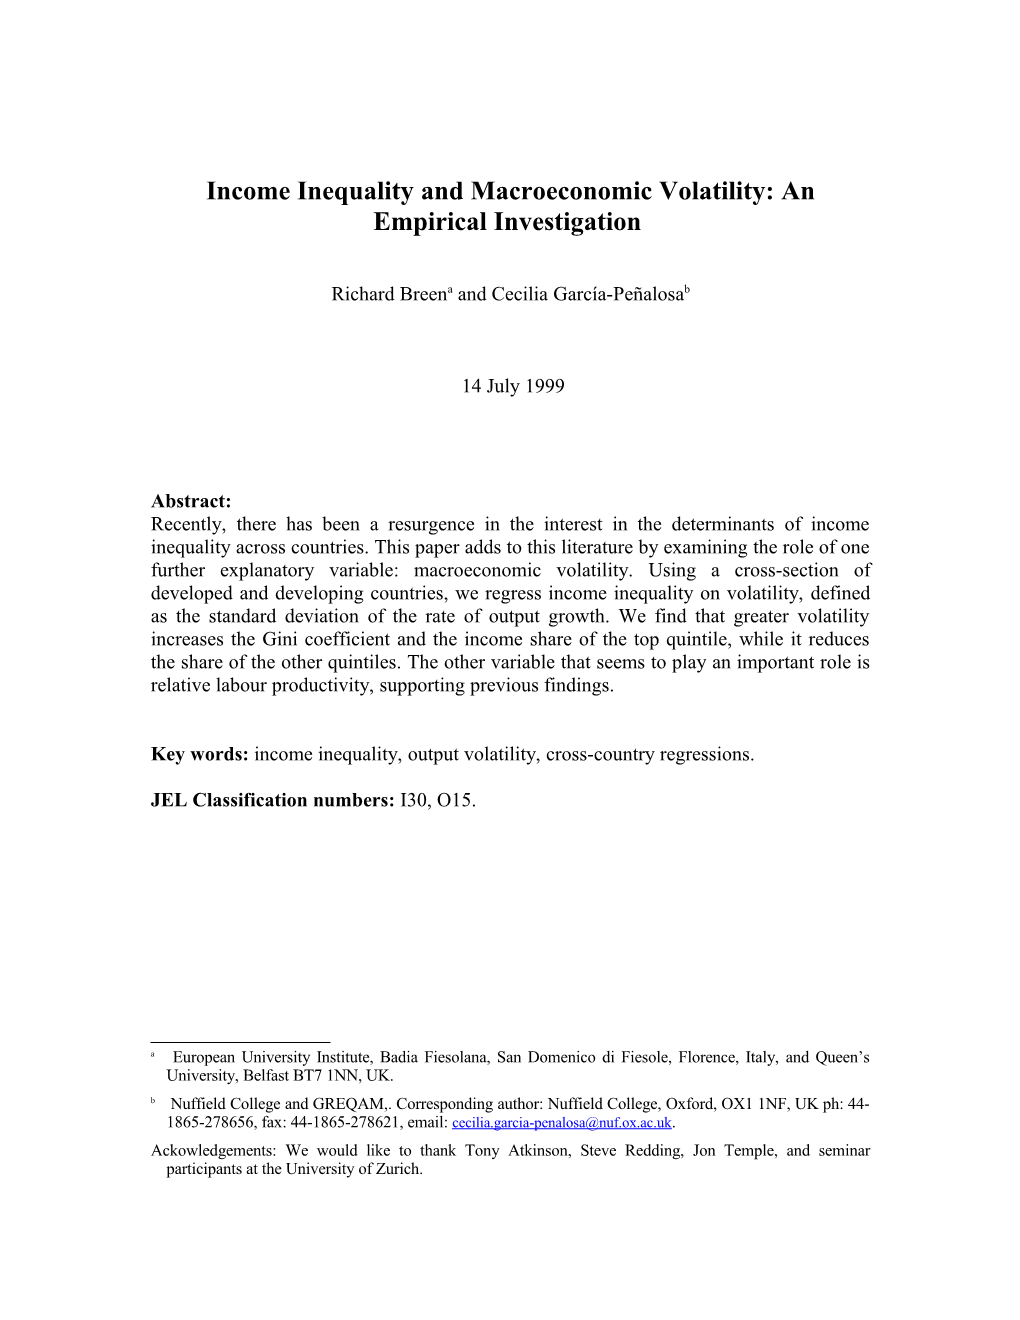 Income Inequality and Macroeconomic Volatility: an Empirical Investigation